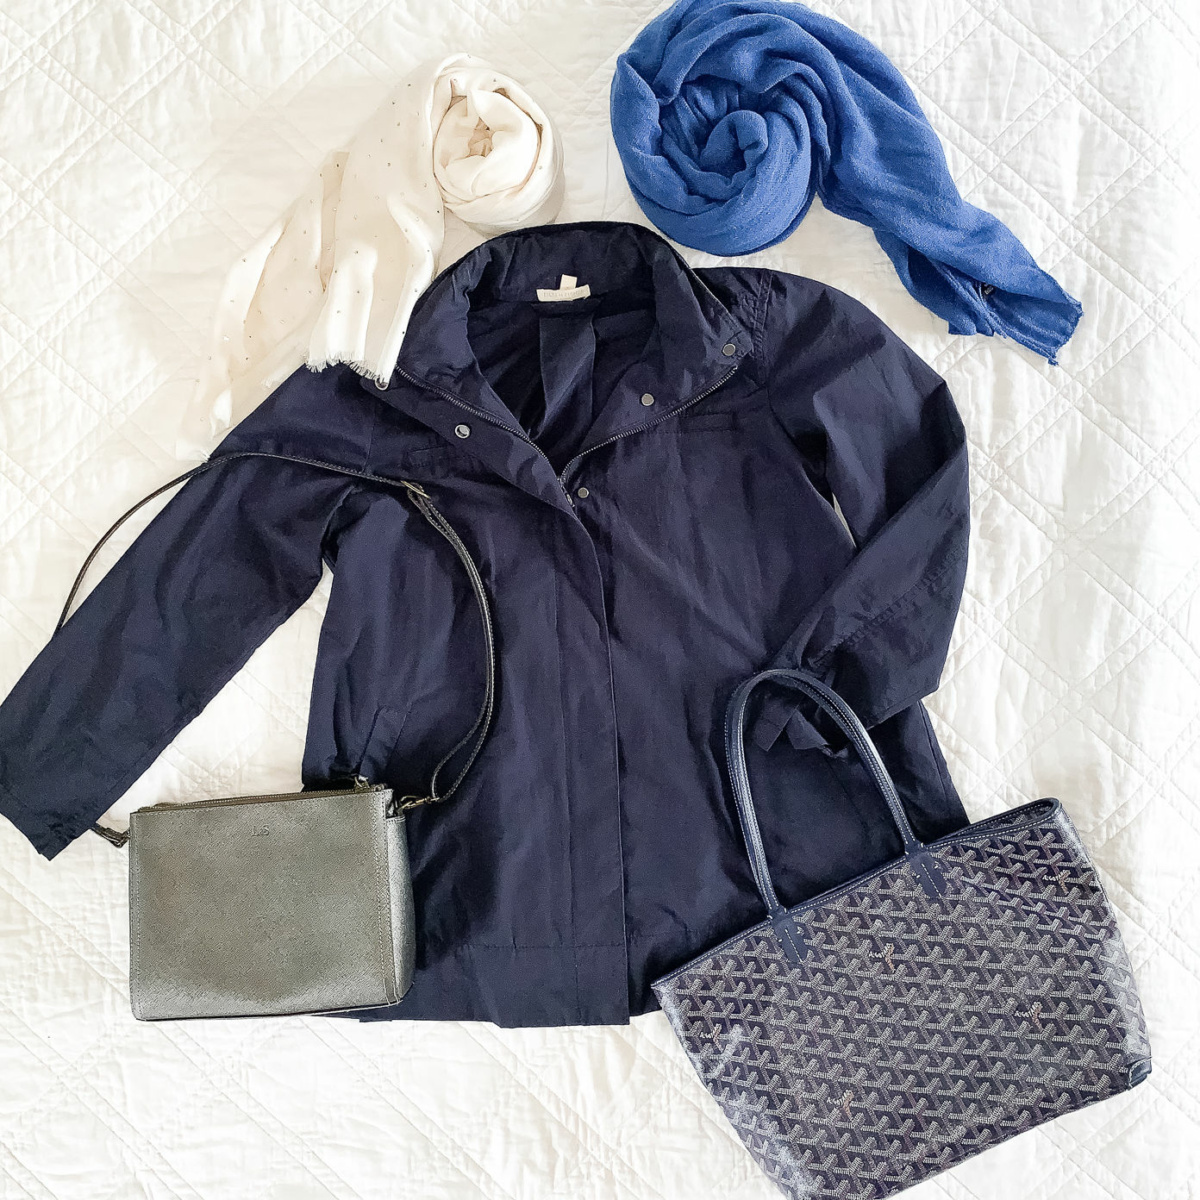 Summer travel wardrobe: outerwear, bags, scarves